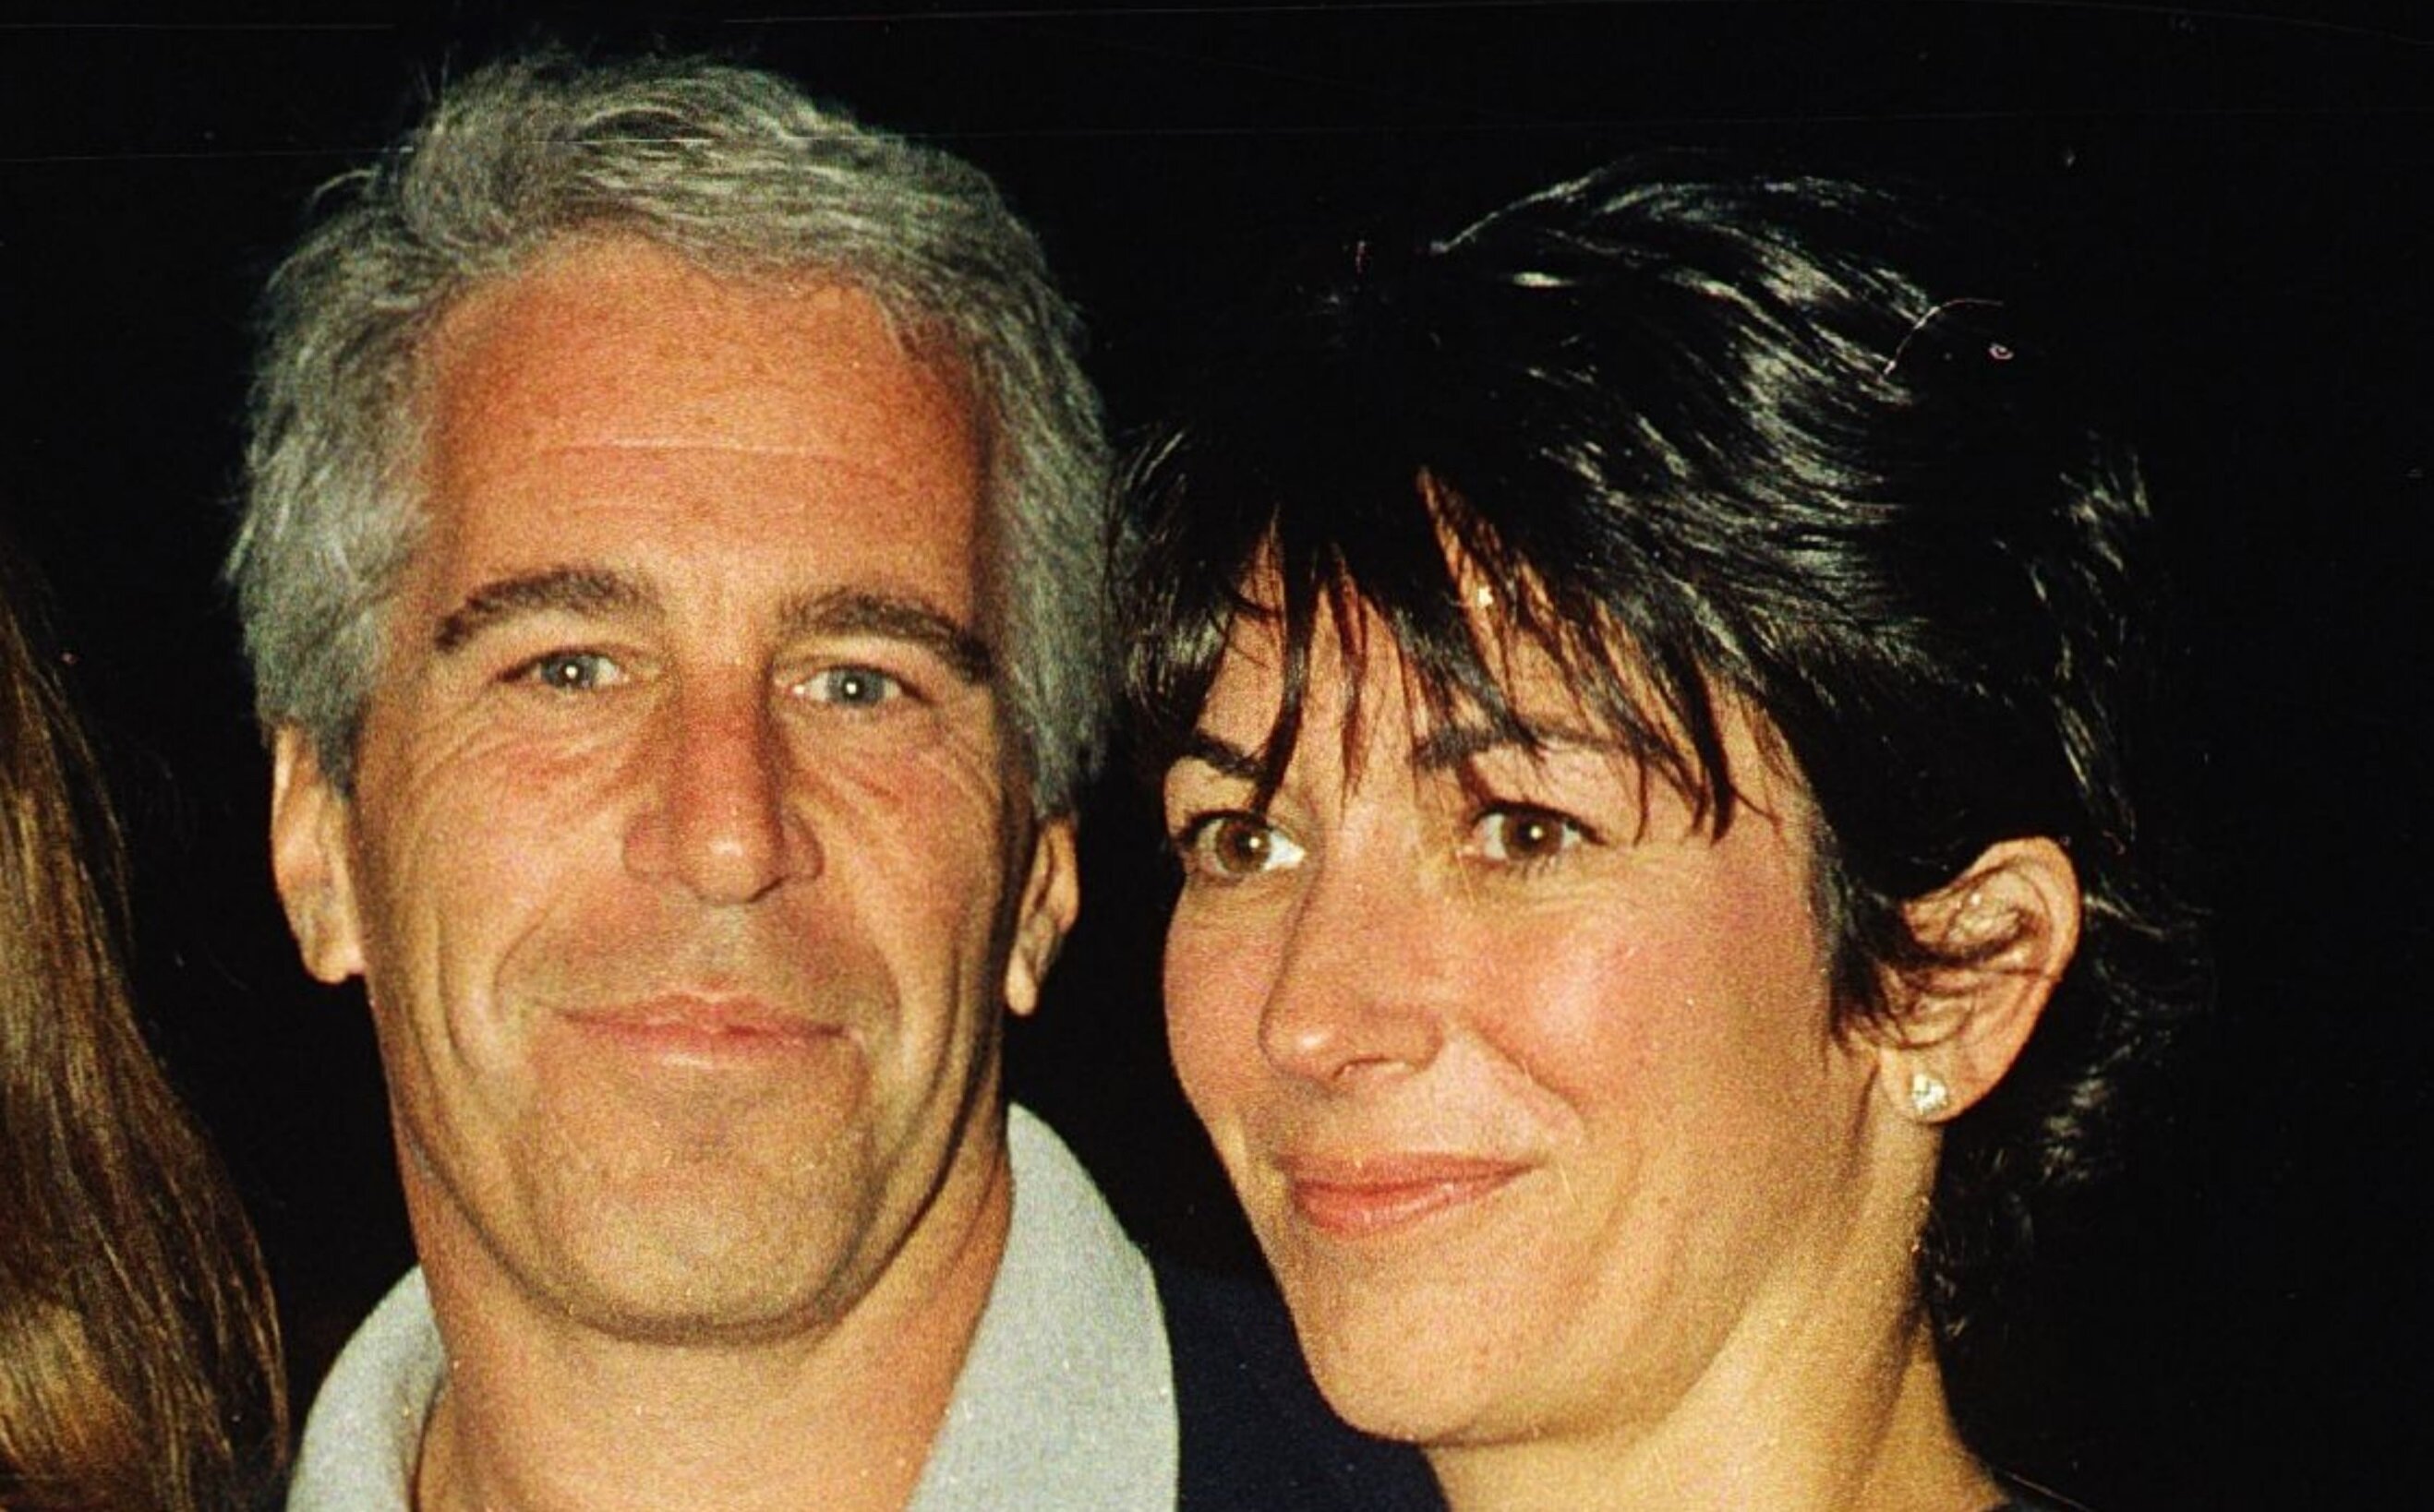 New documents have been unsealed from Ghislaine Maxwell's 2015 lawsuit. Check out the secrets hidden in the documents.